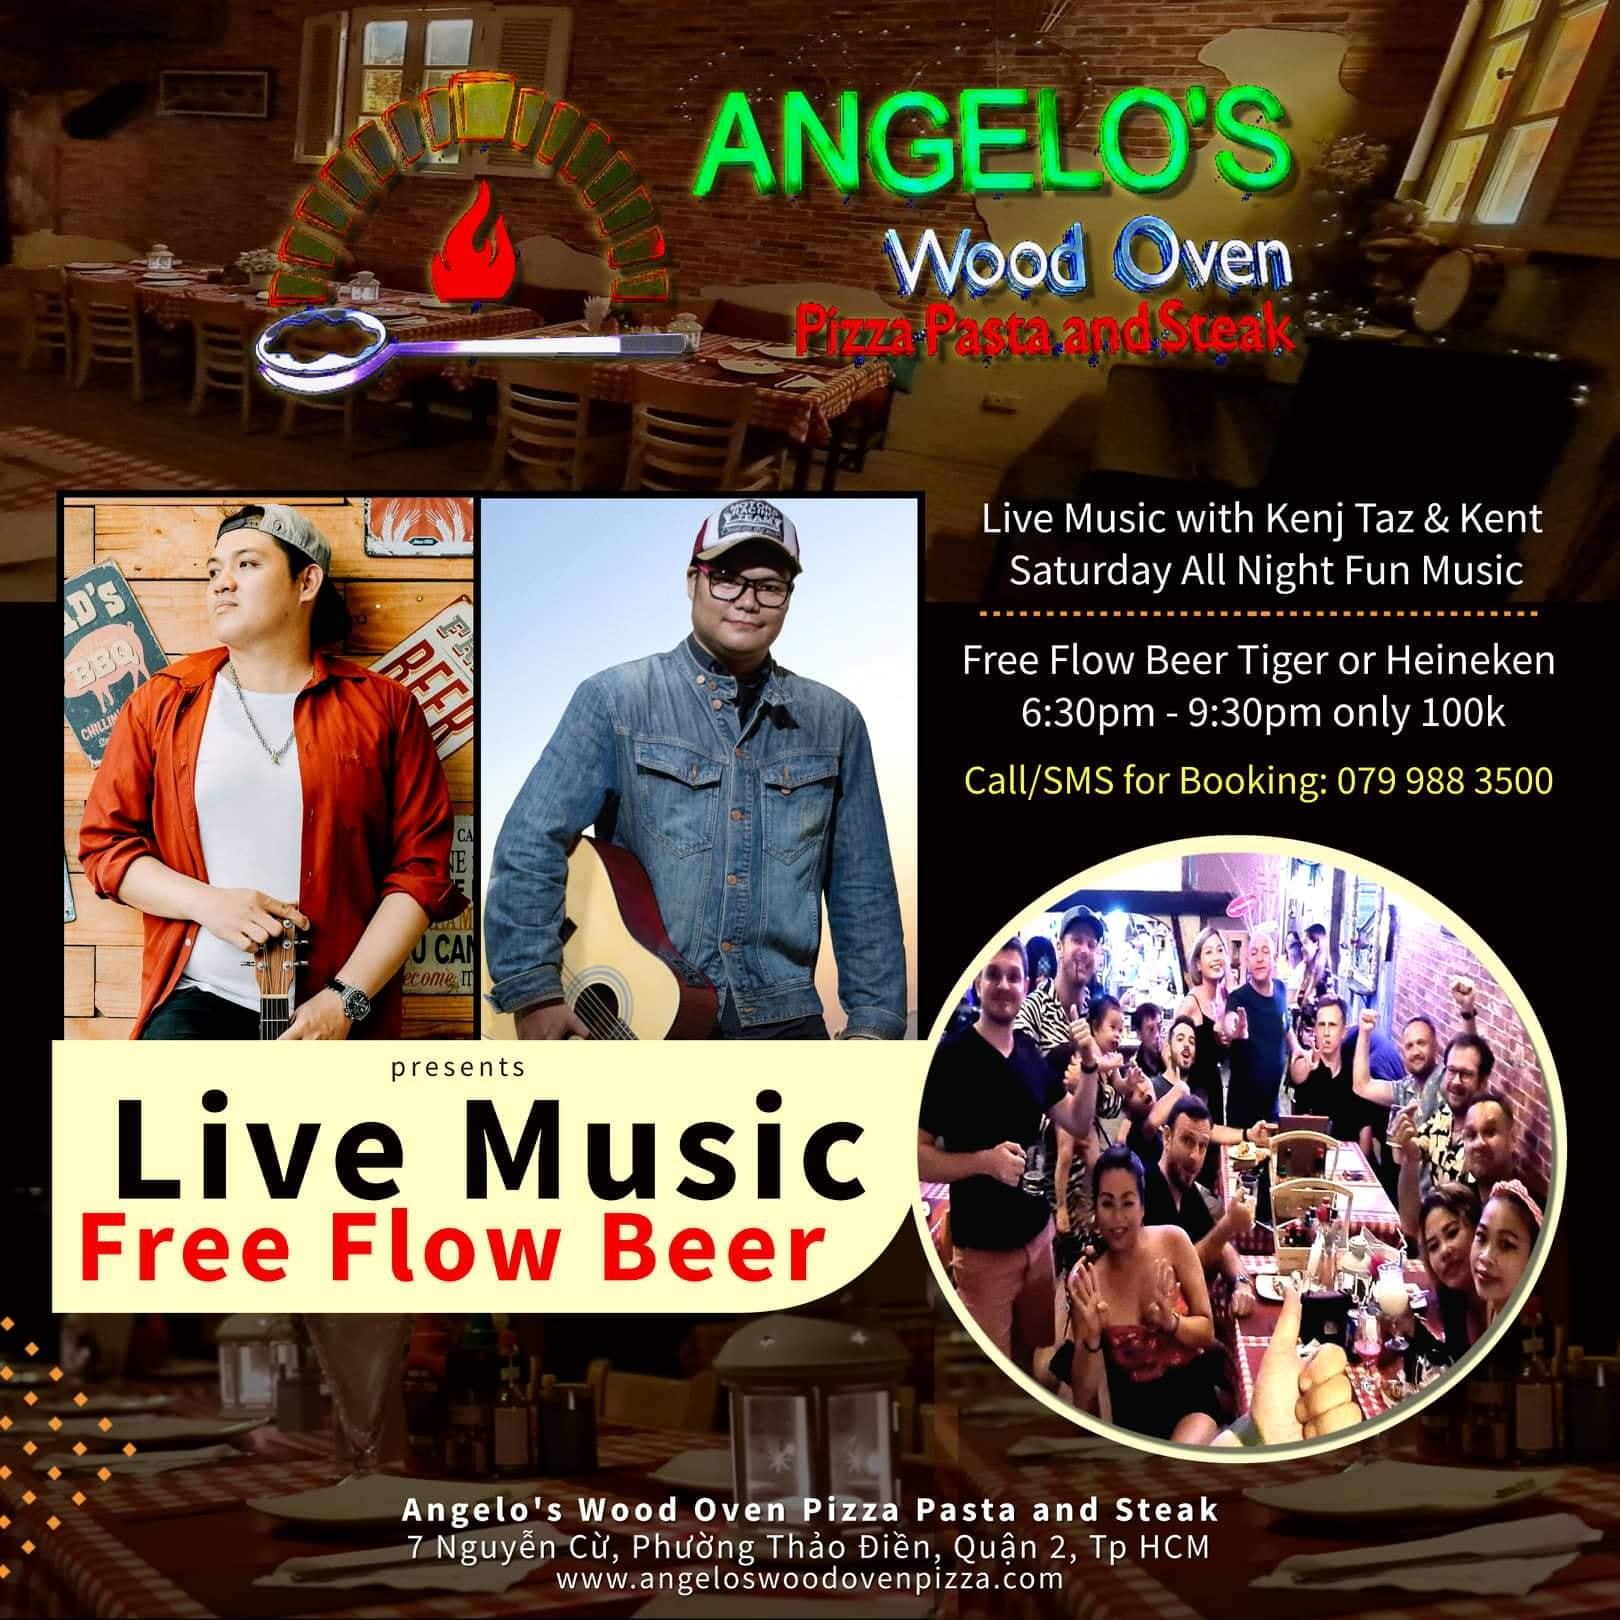 FREE FLOW BEER & LIVE MUSIC PARTY CHỈ CÒN 100k